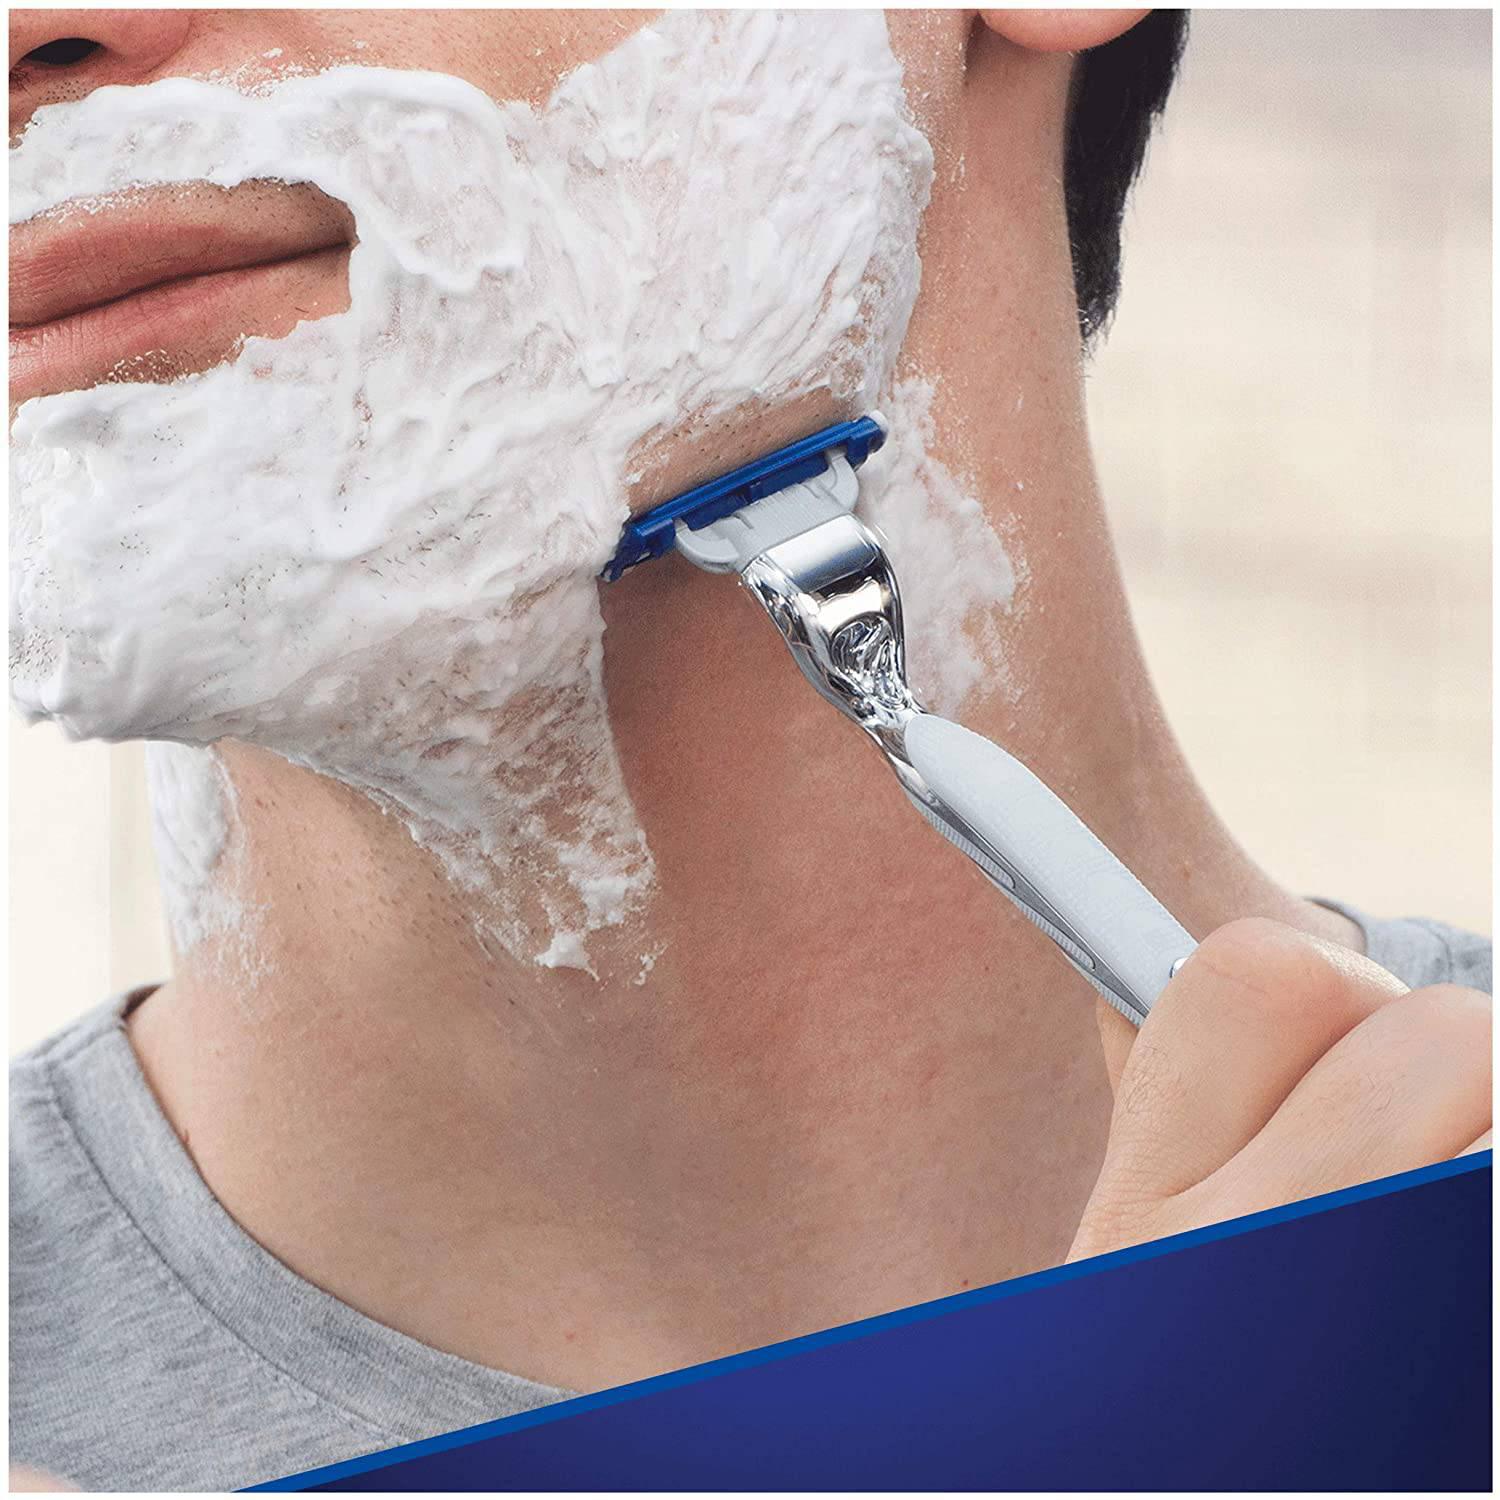 Gillette Mach3 Turbo Men's Razor - with More Lubricants and Larger Skin Guard - Healthxpress.ie